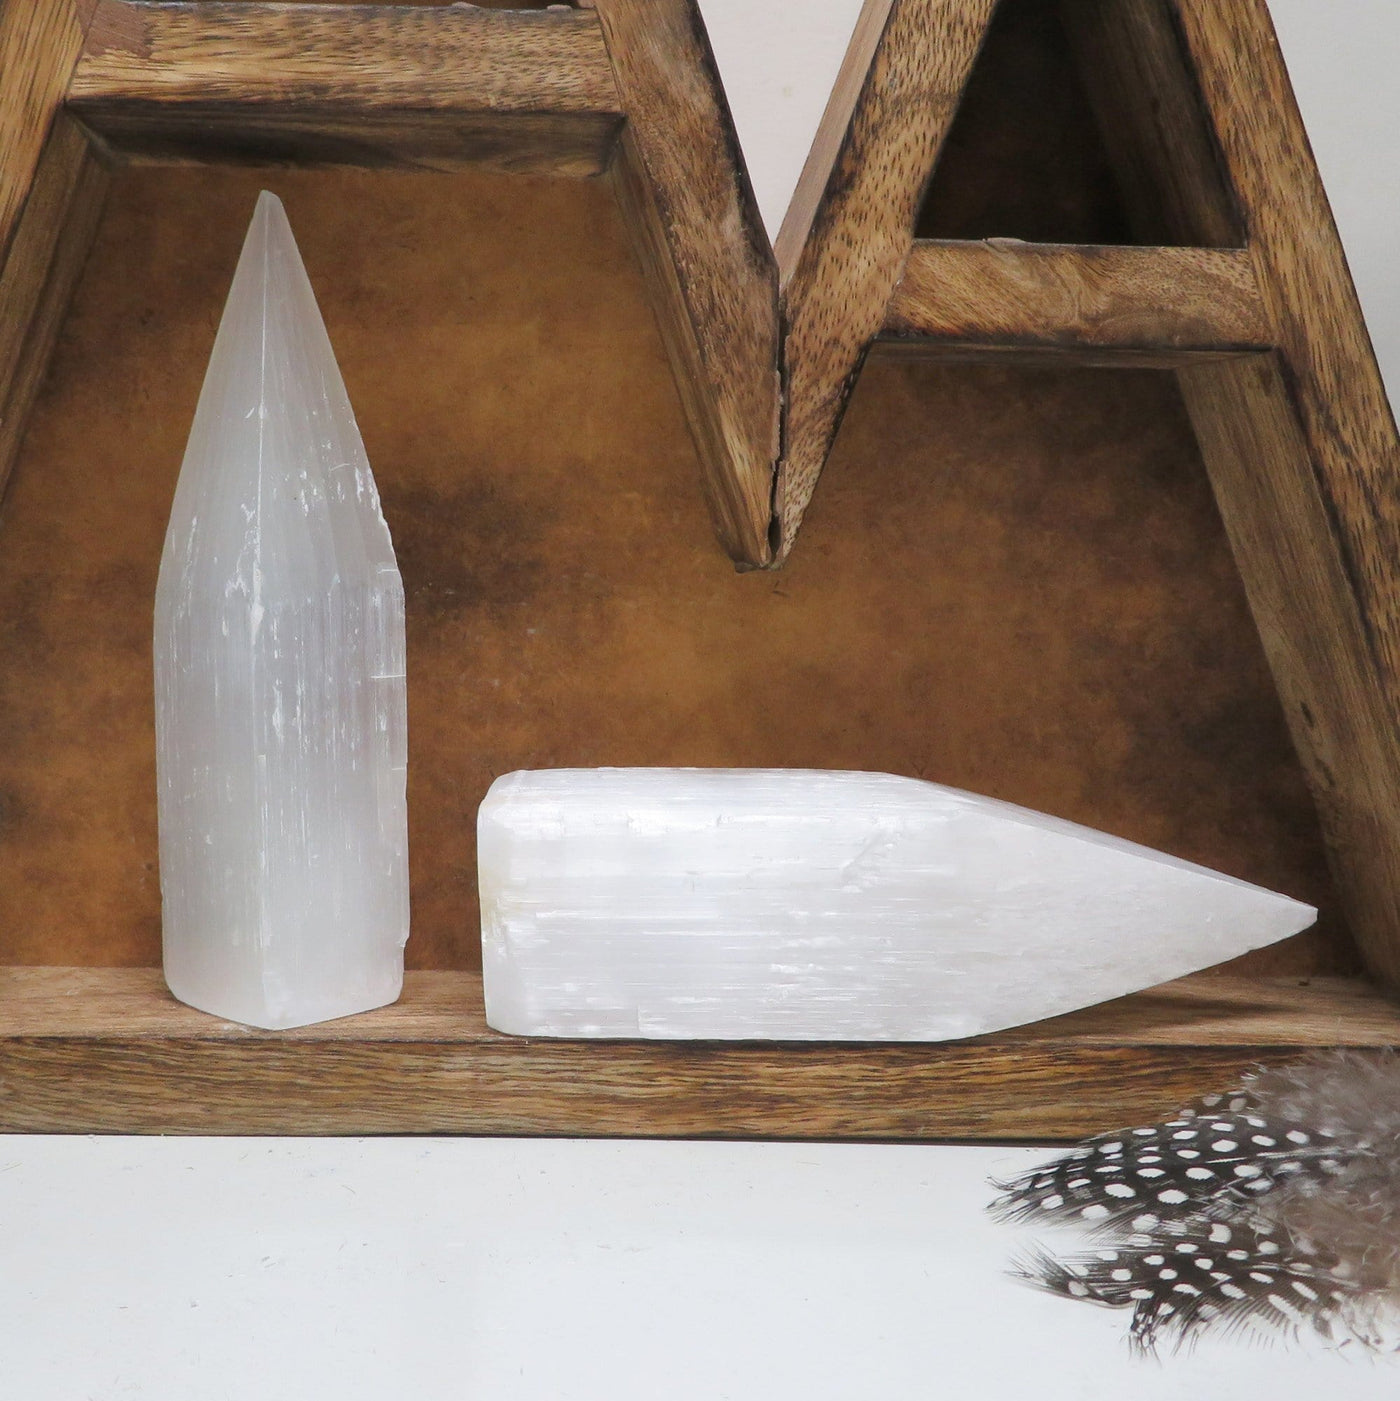 one selenite tower obelisk point on display with a second selenite tower obelisk point laying on its side